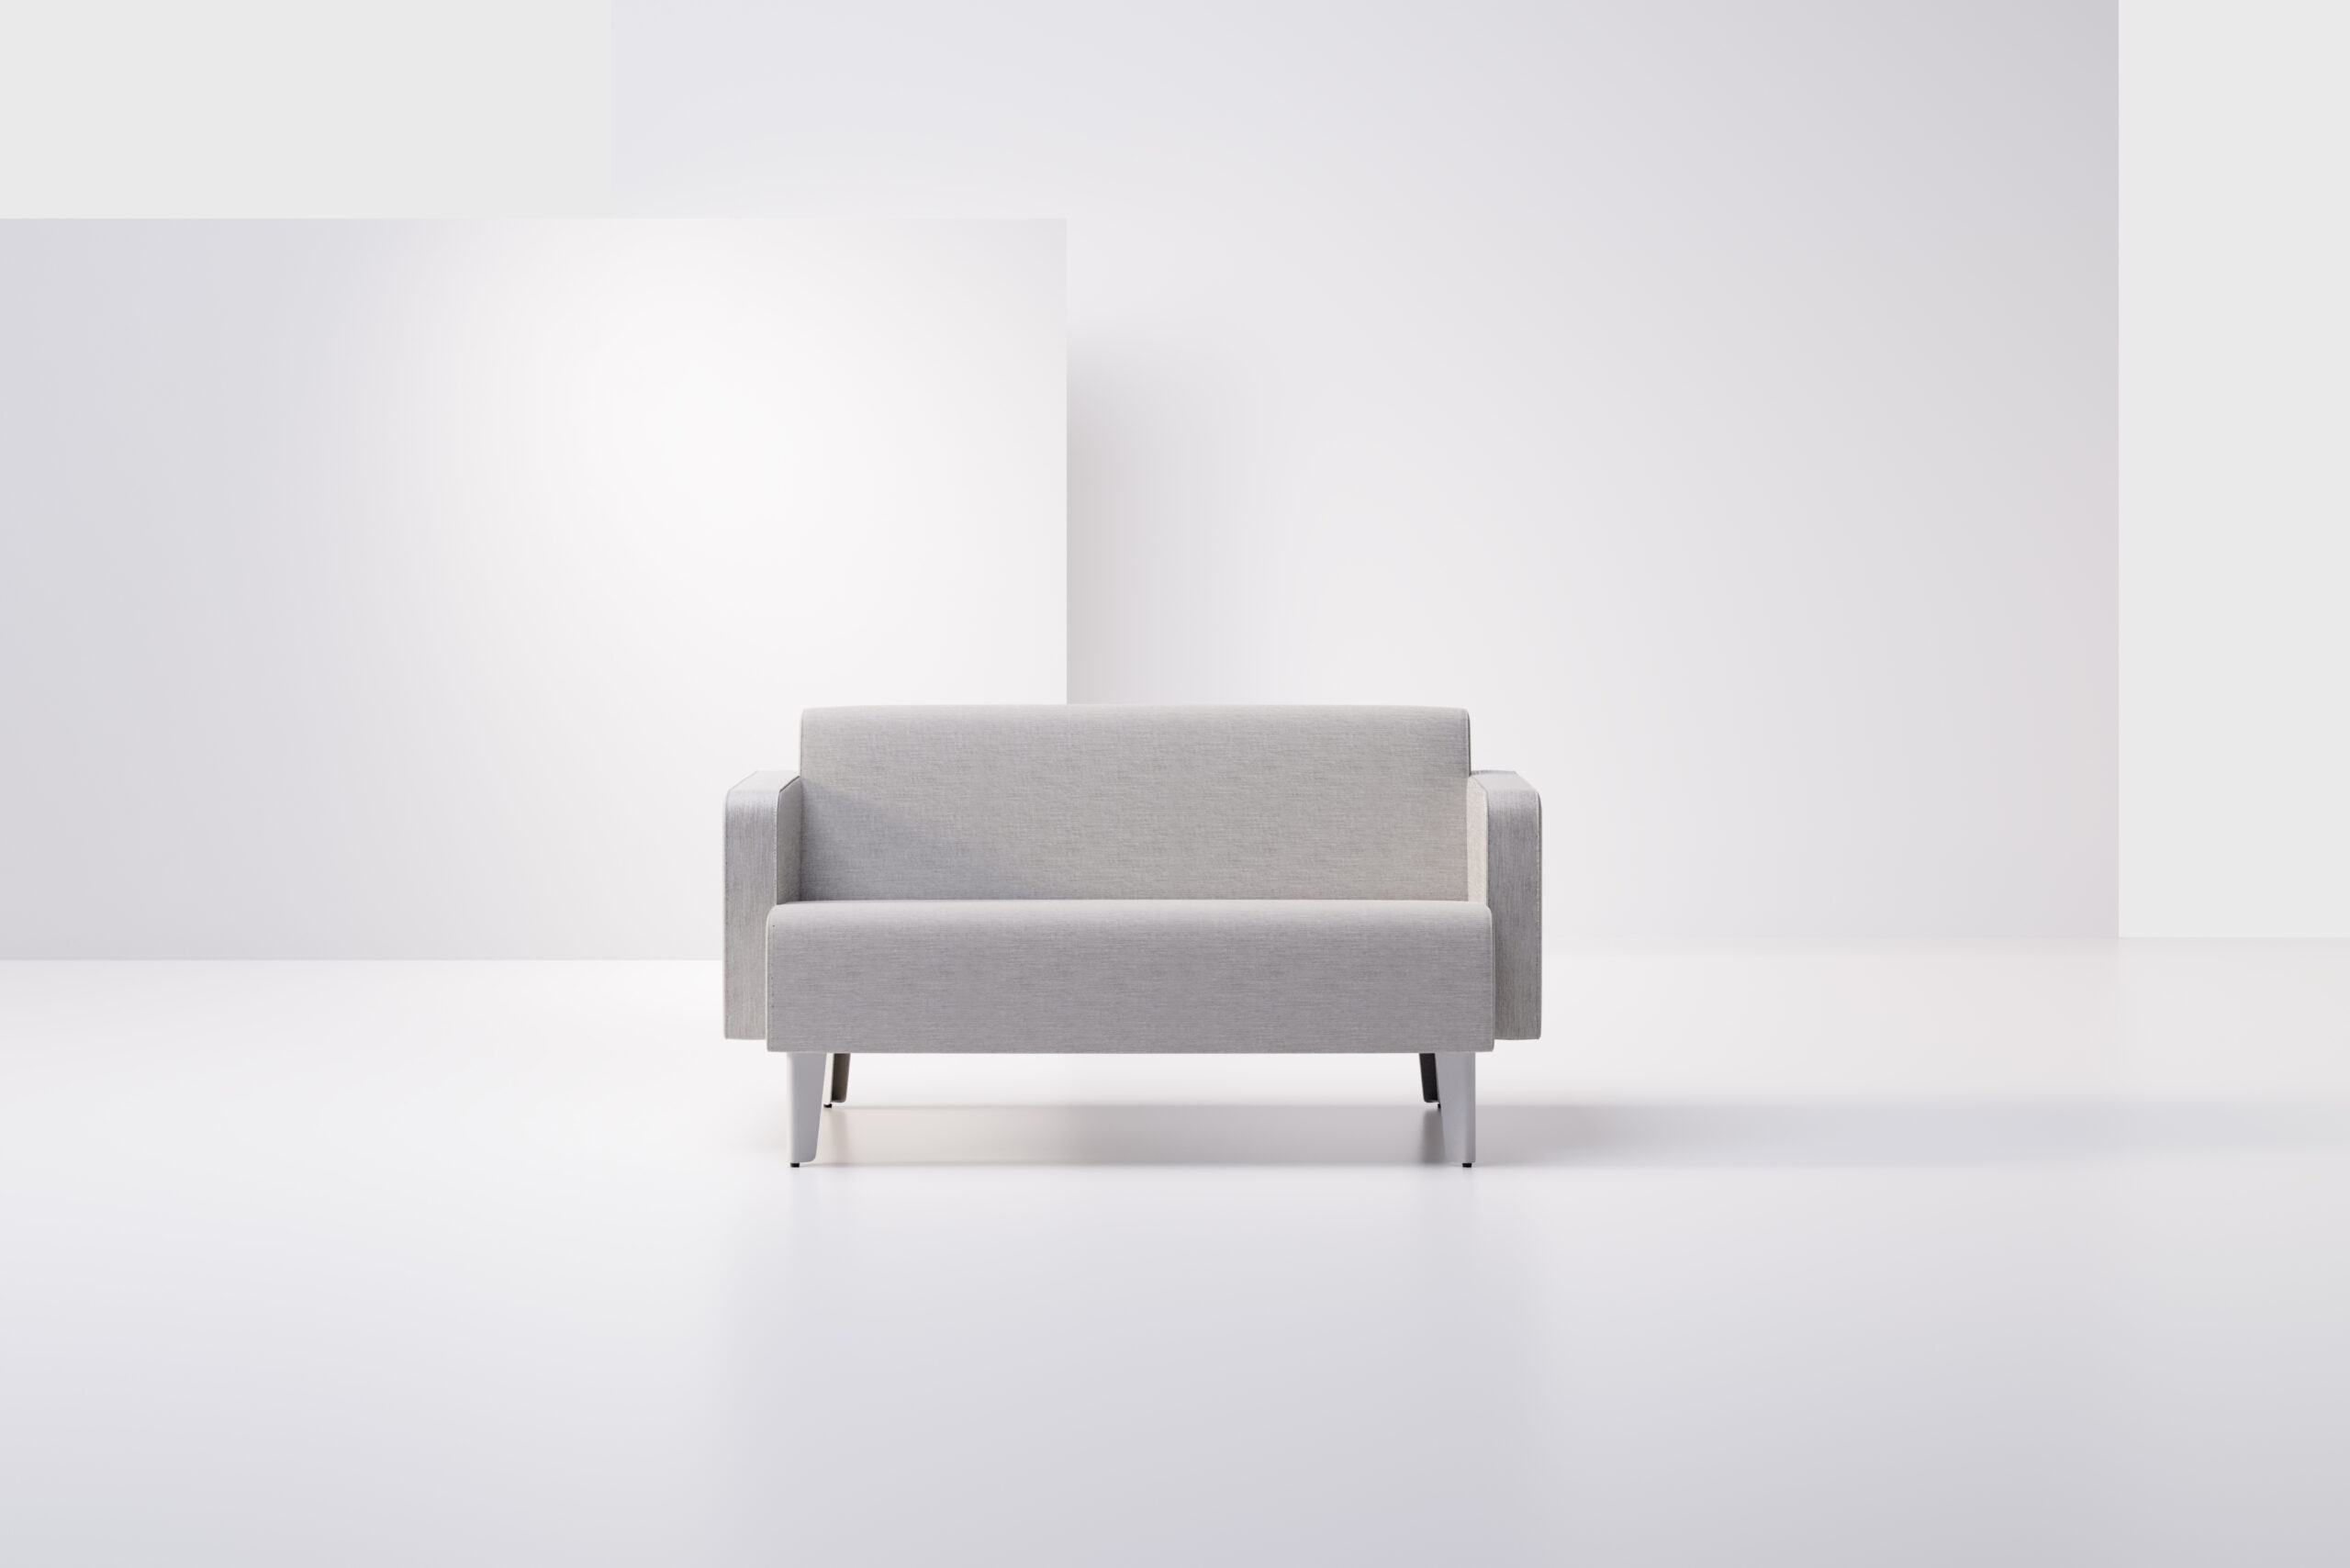 Avila Sofa with Upholstered Arms Featured Product Image